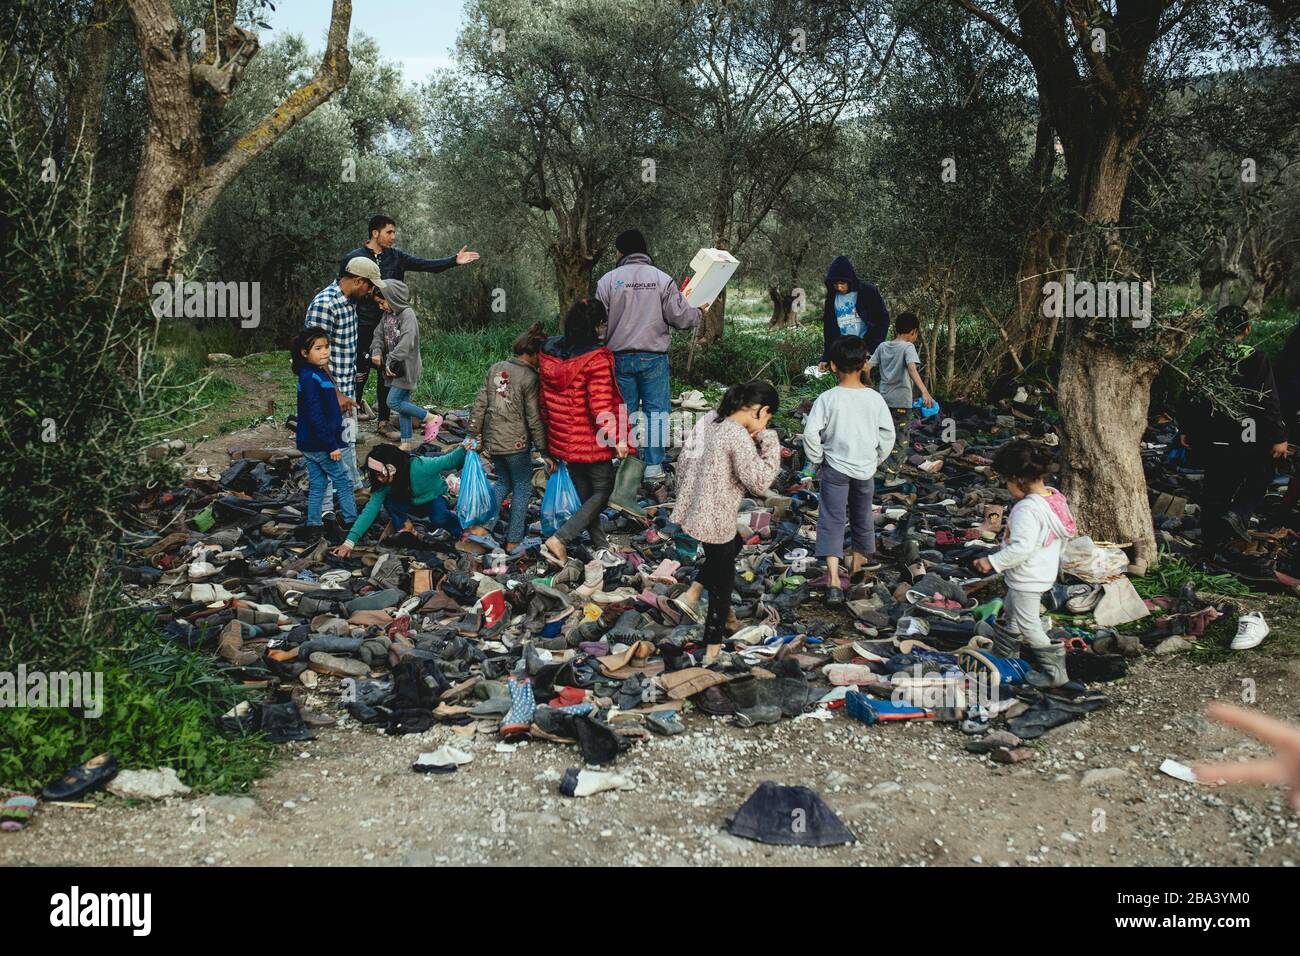 Refugees look for shoes from a pile of donations, Refugee camp in Moria, Lesbos, Greece Stock Photo